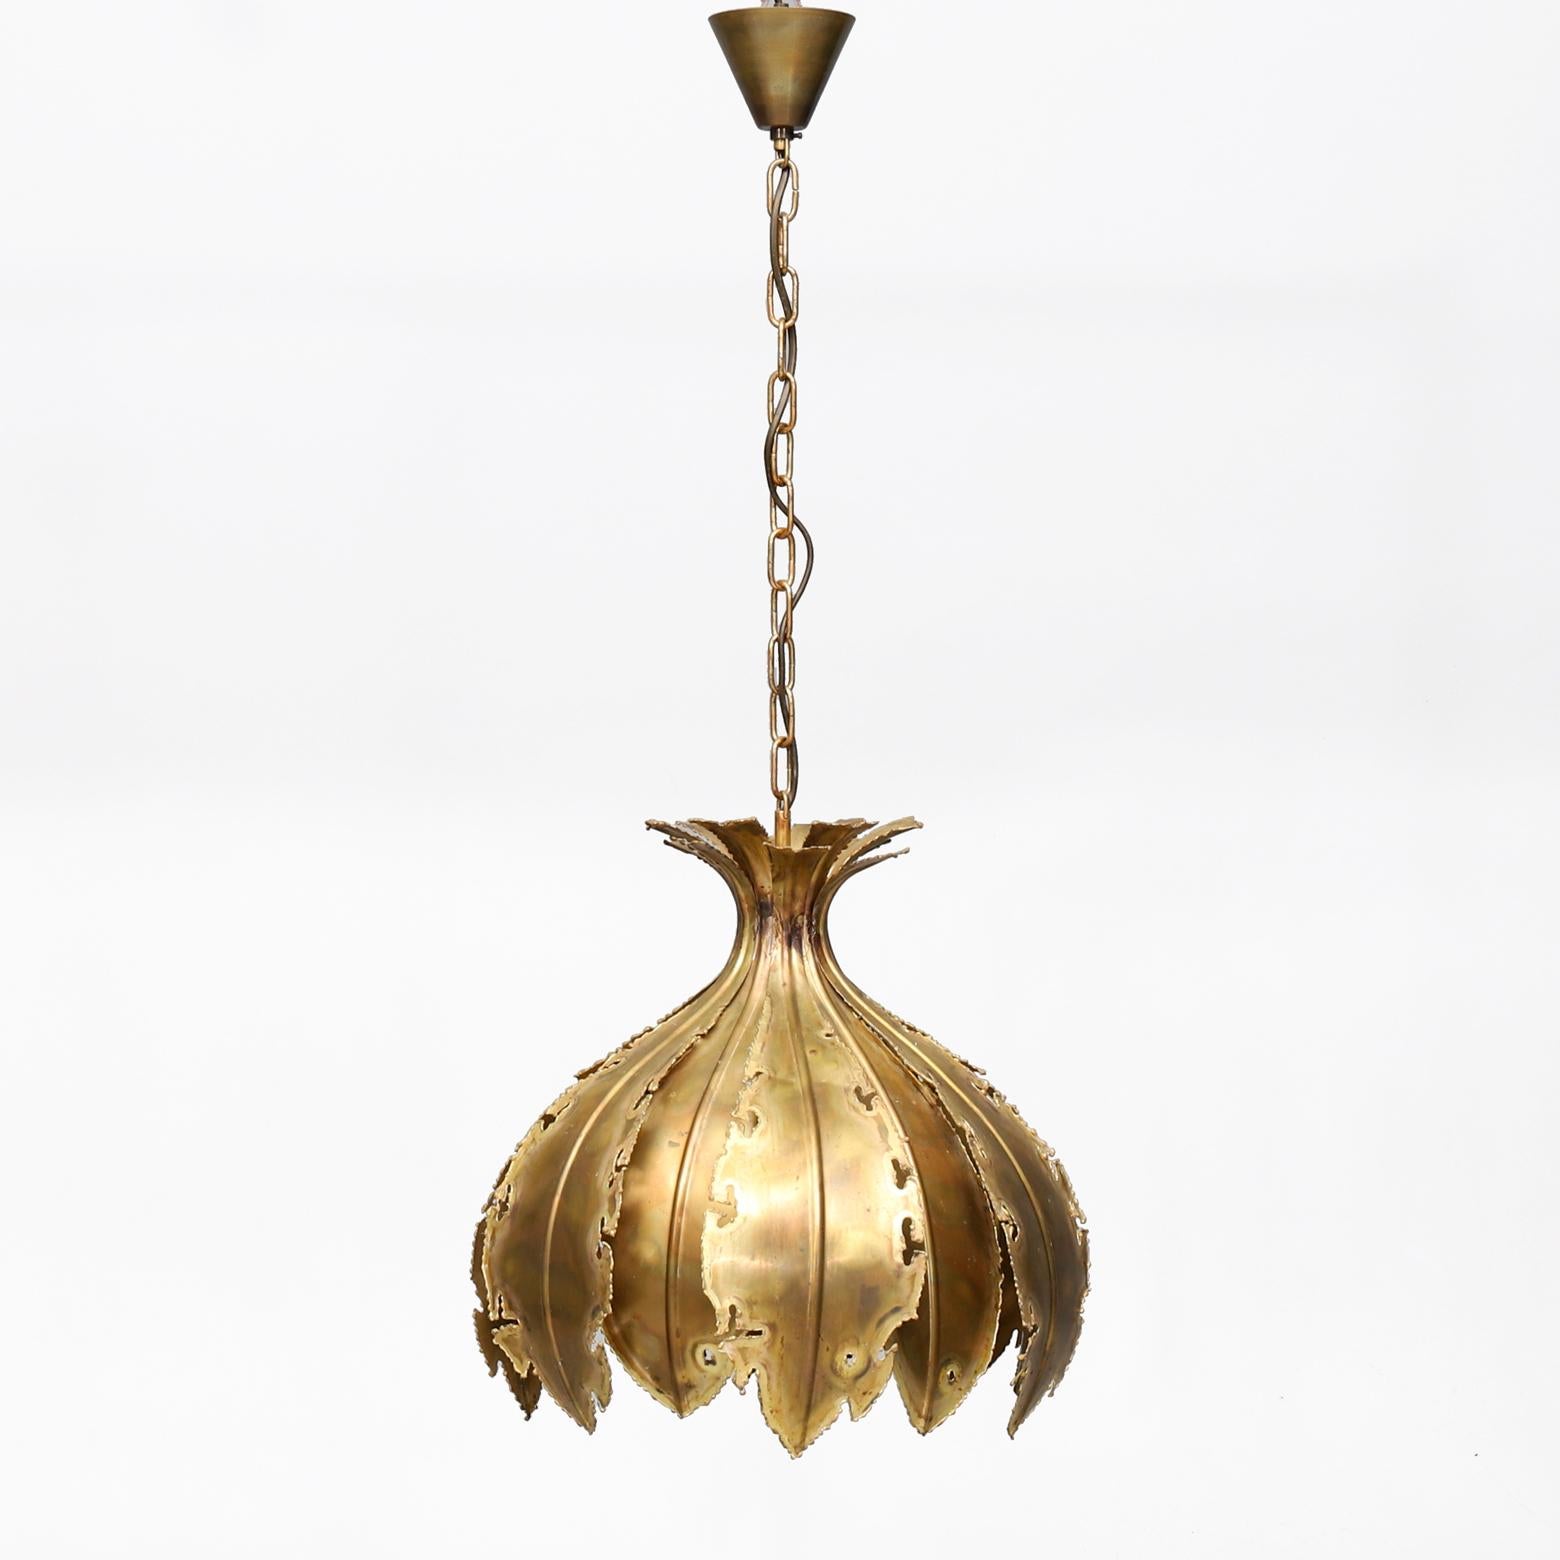 Danish Brutalist chain-suspended hanging lamp composed of acid-treated and torch-cut brass. This model, 'P6395', was designed by Svend Aage Holm Sorensen in the early 1960s. (Acid treated in Holm Sorensen’s special process and his signature),